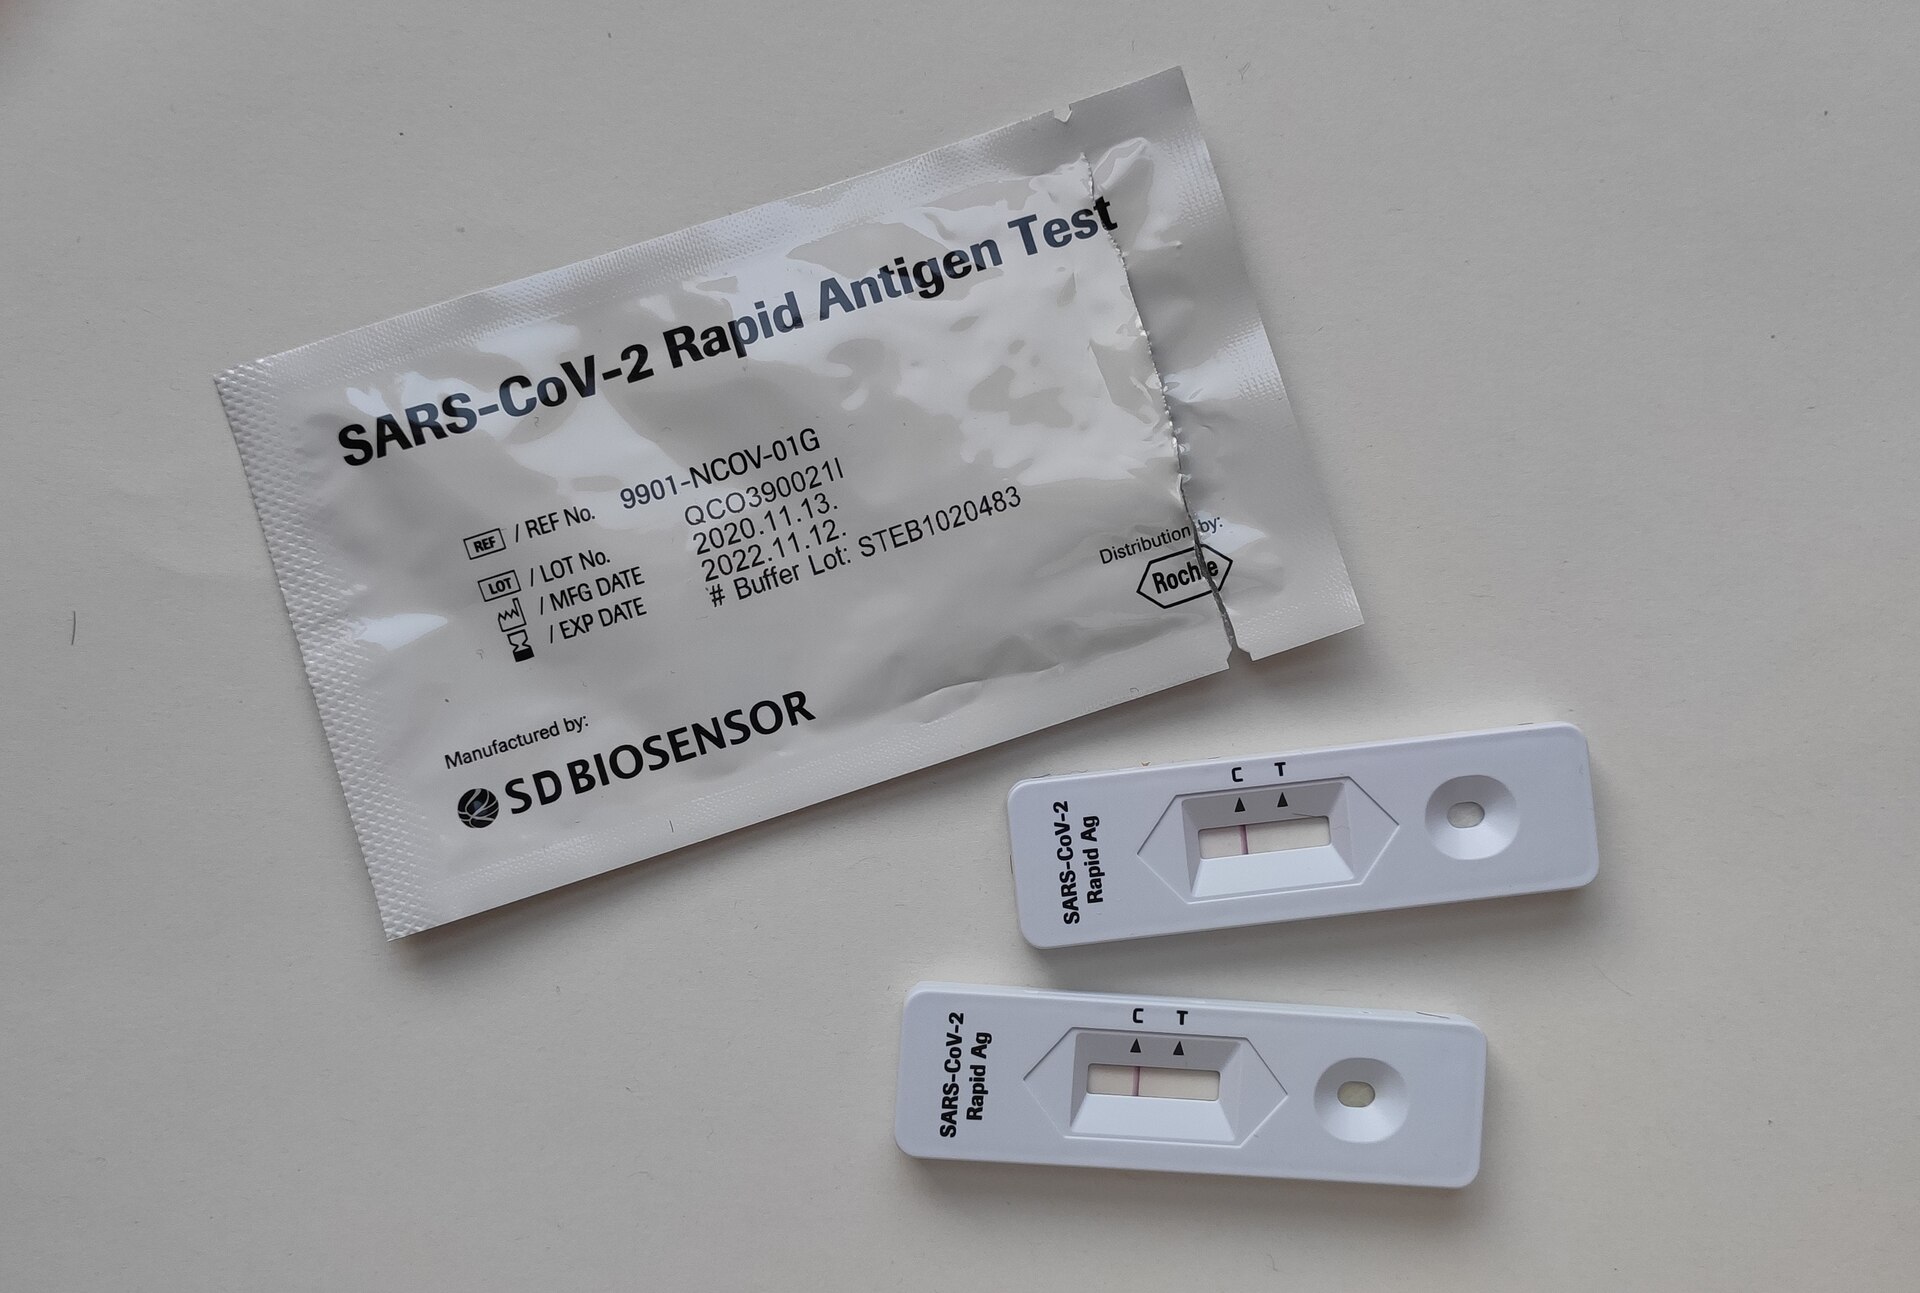 Covid-19 Rapid Antigen Test with a negative result